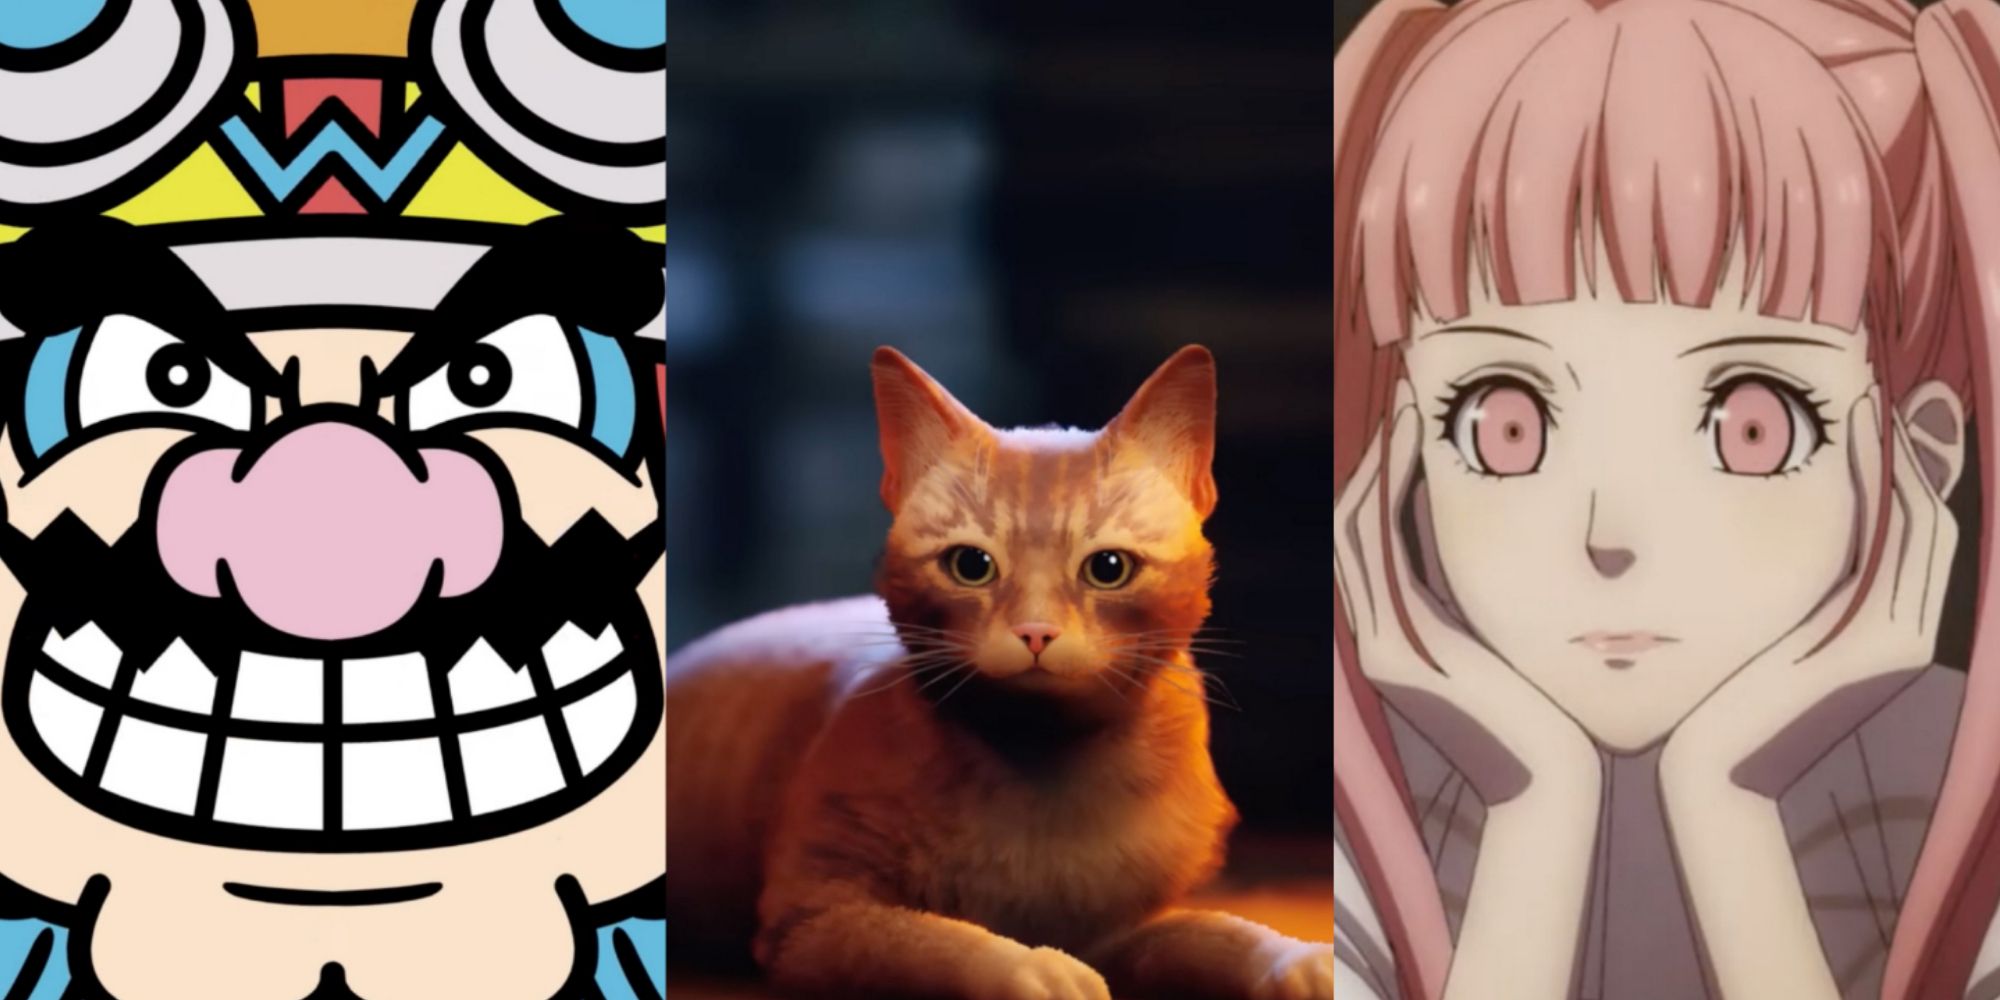 Cover Image for Video Game Characters Who Would Fail At Pizza Delivery Featuring Wario from Warioware, Cat from Stray, and Hilda from Fire Emblem Three Houses